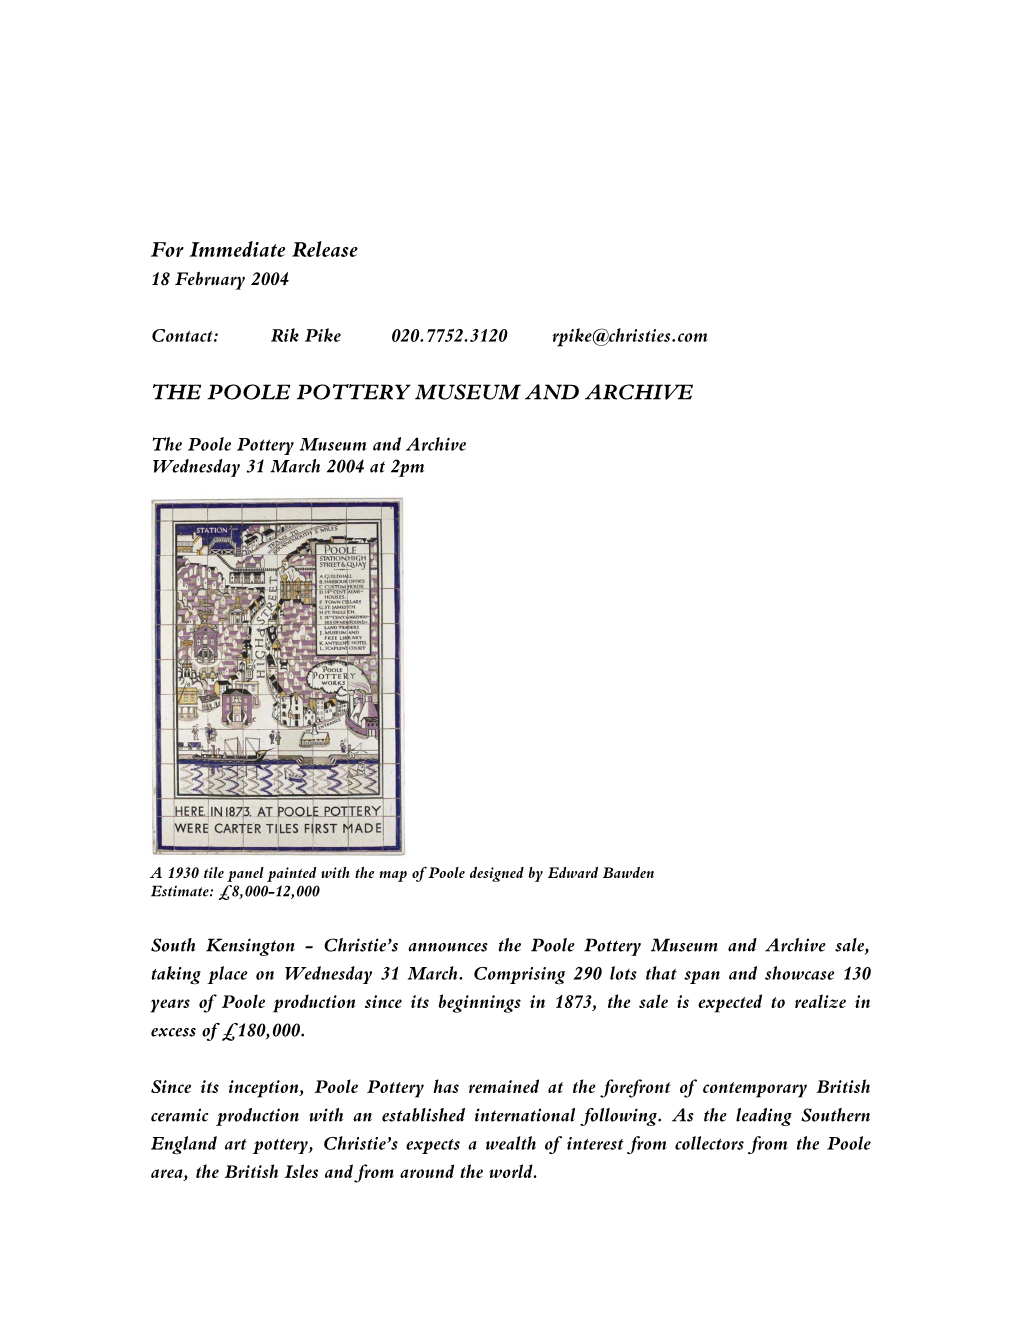 For Immediate Release the POOLE POTTERY MUSEUM and ARCHIVE